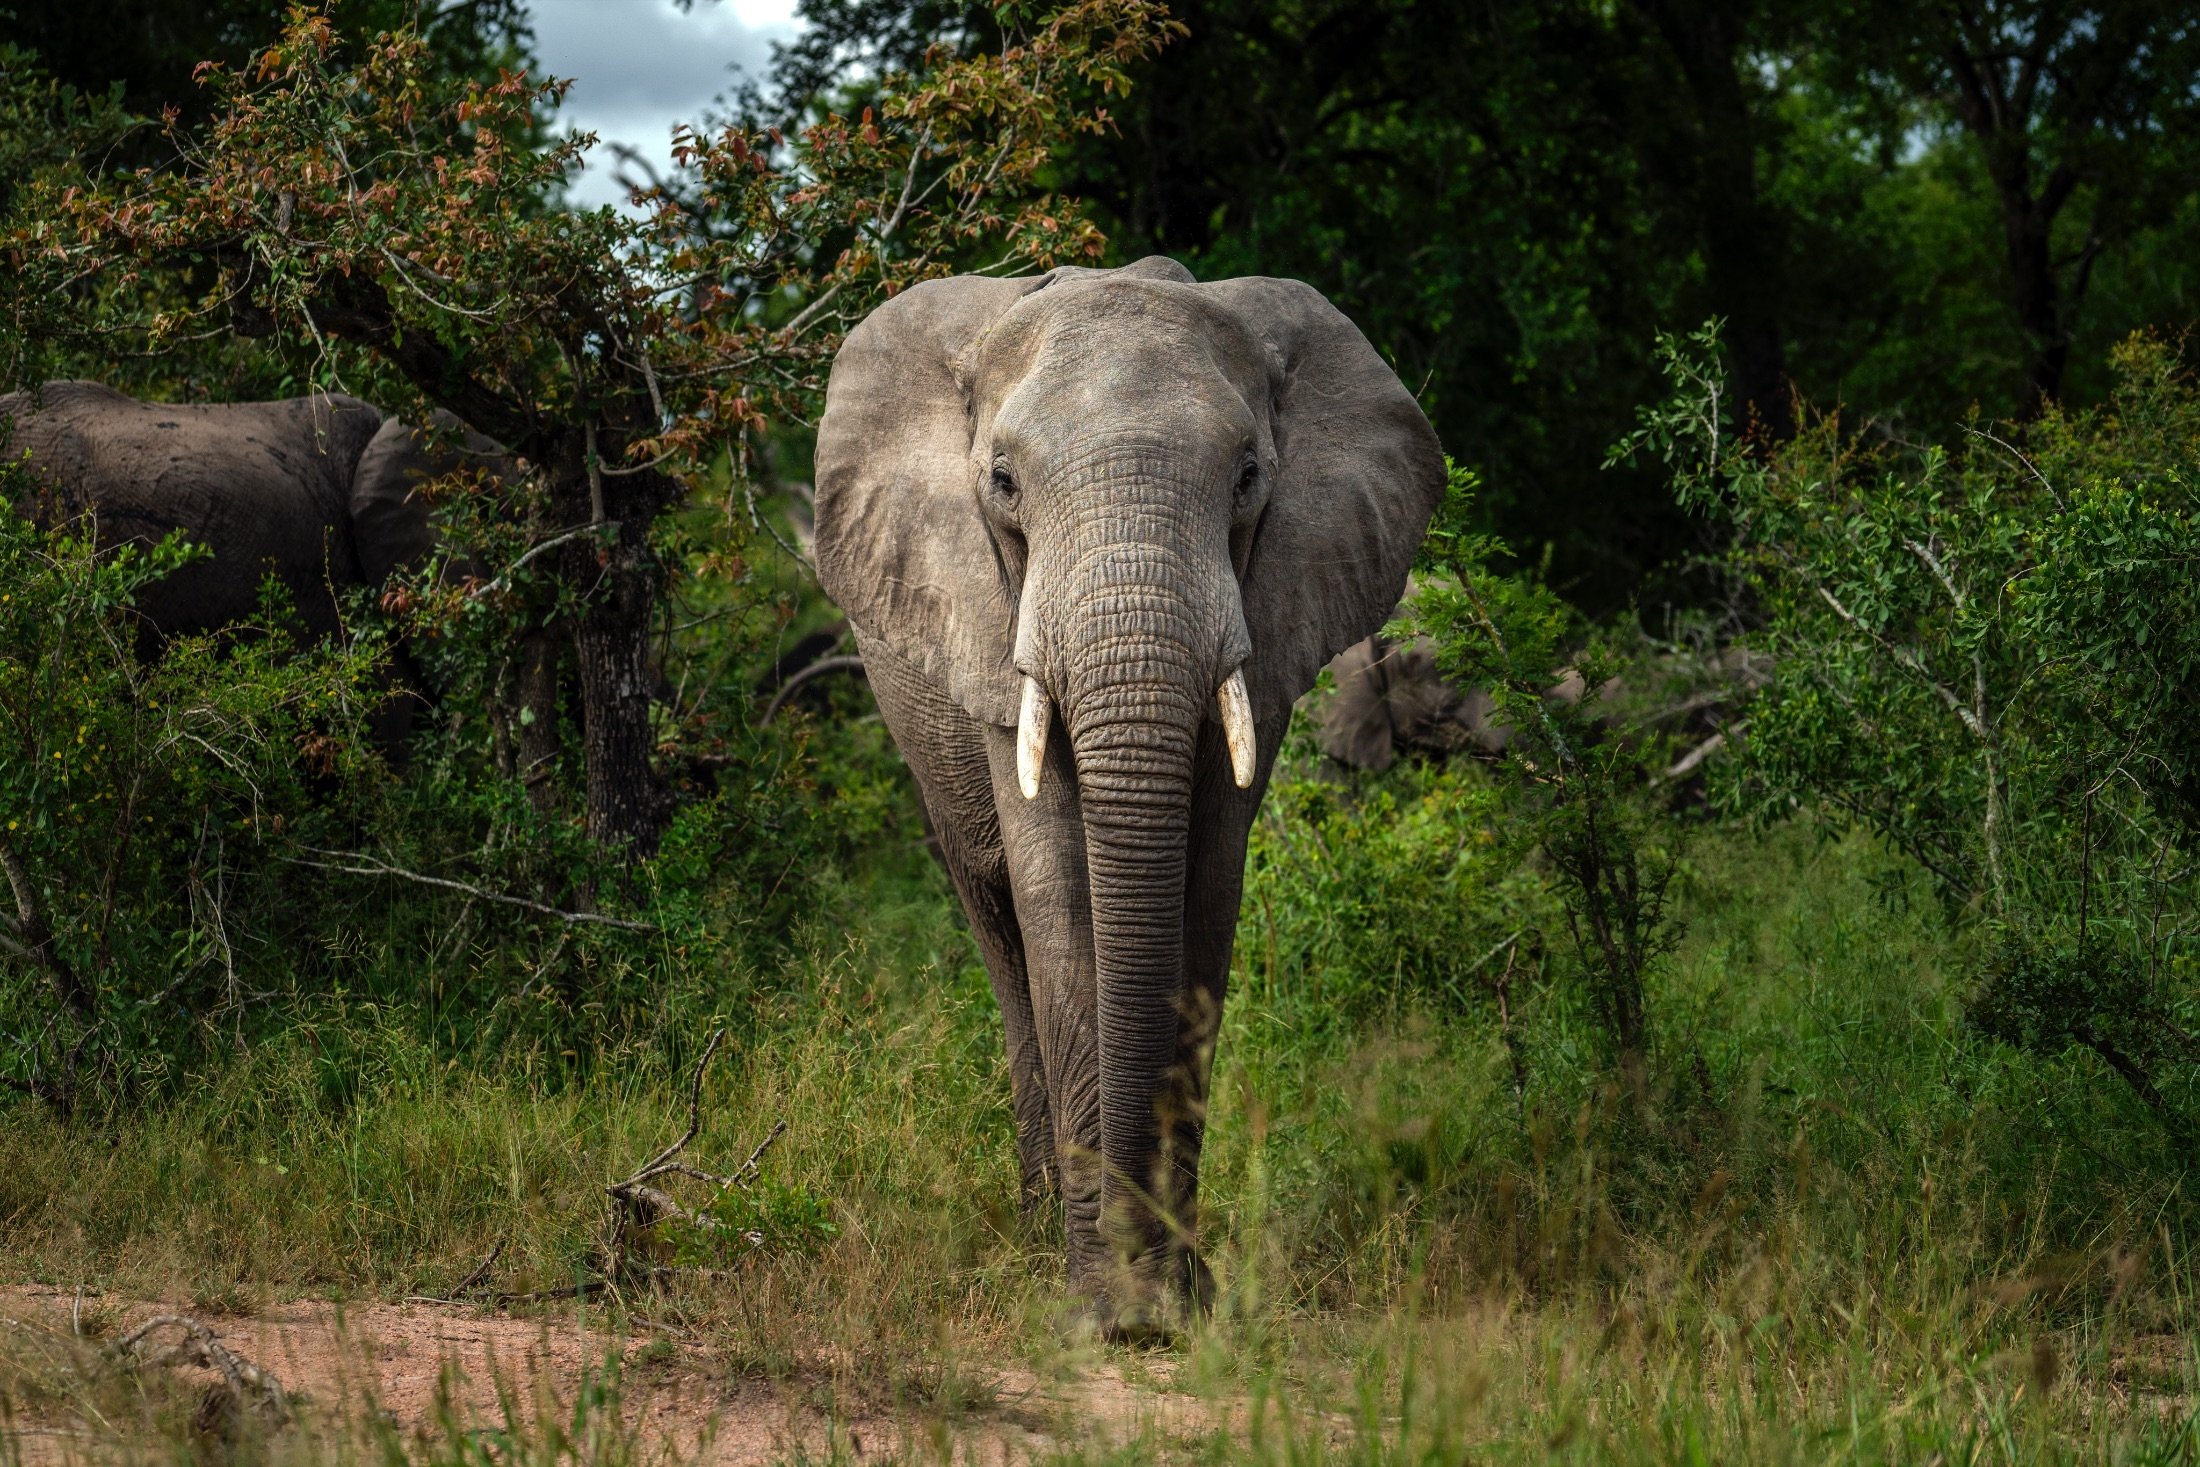 A savanna elephant walks on grass in Kruger National Park, South Africa, March 4, 2020. (AP Photo)